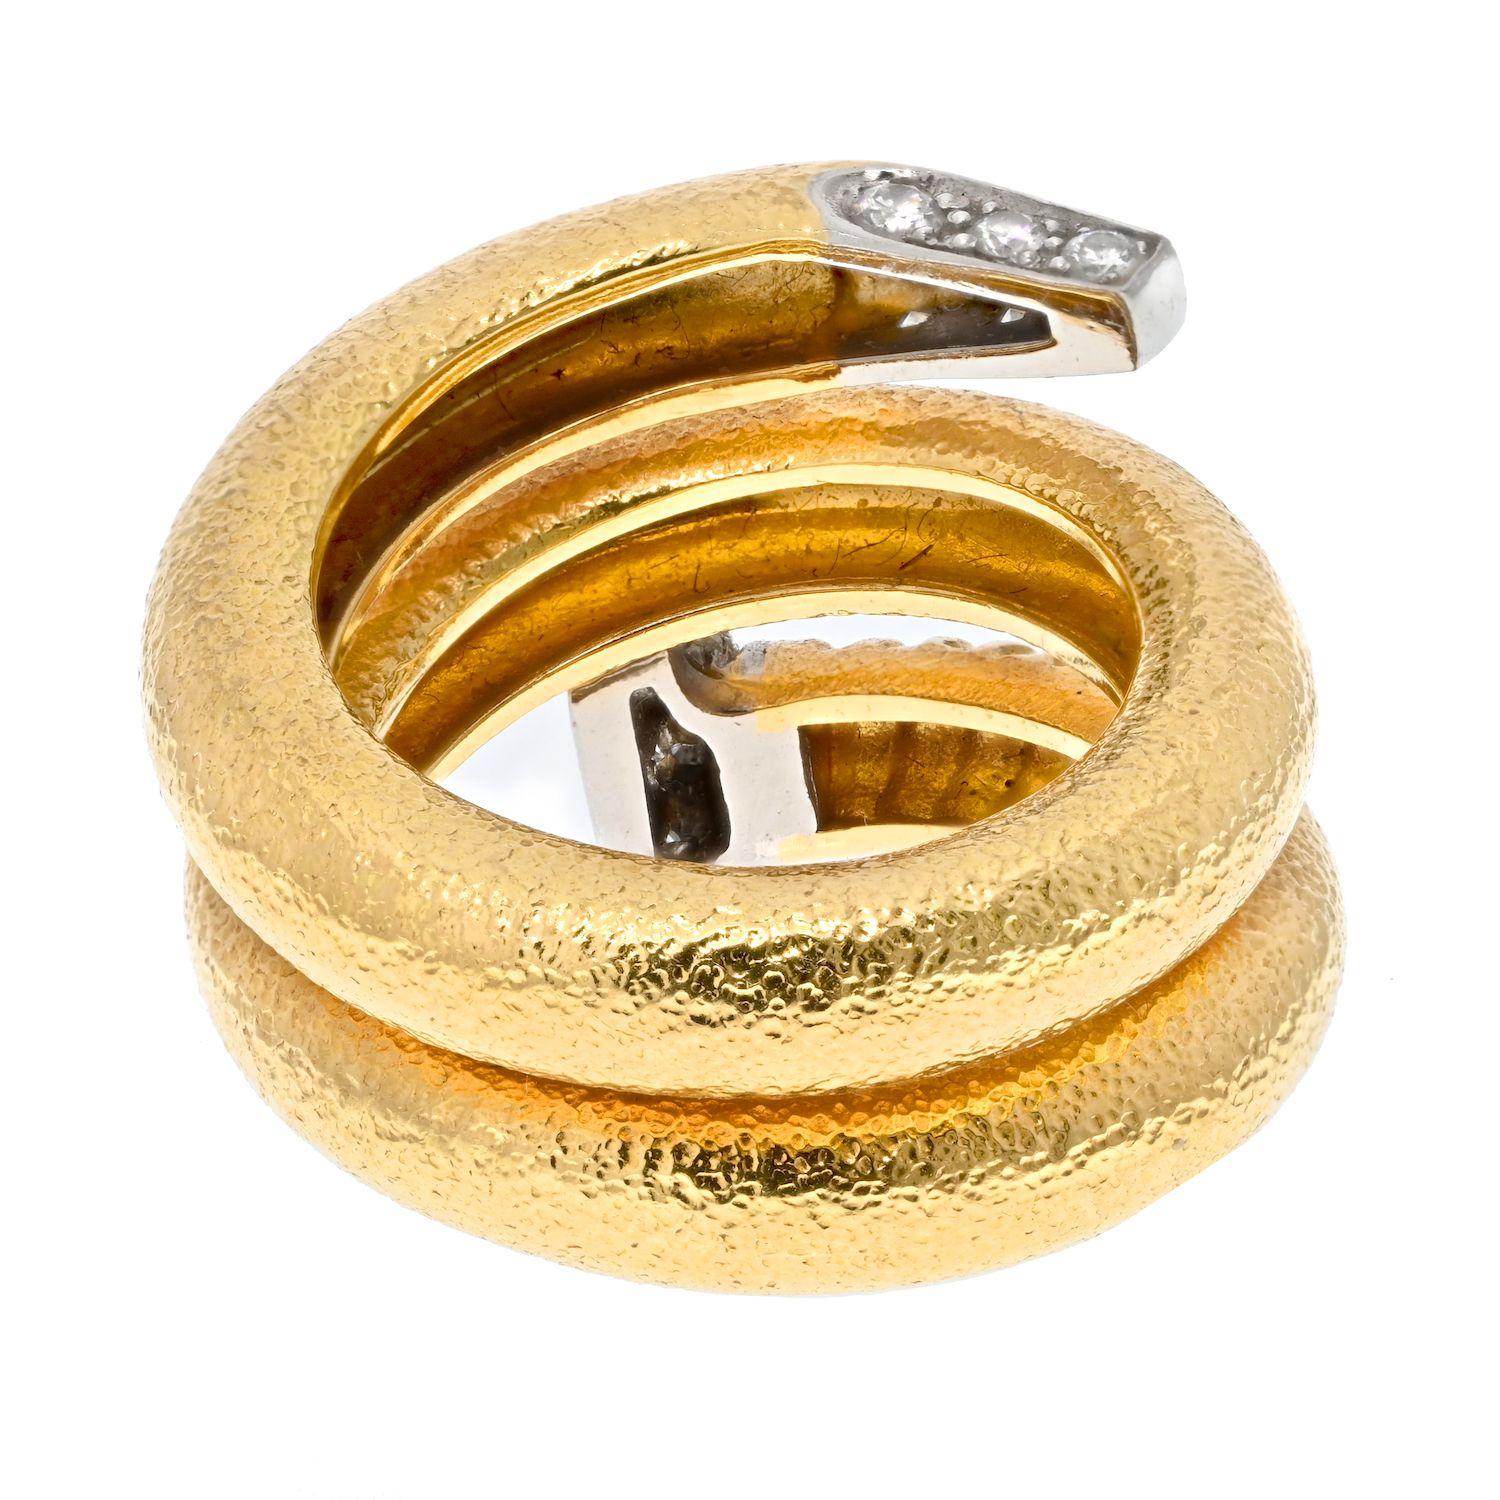 David Webb Platinum & 18K Yellow Gold Nail Ring.
Twisted nail made of hammered finish 18k yellow gold, with tip and nob encrusted with round cut diamonds. This ring is one of the most wearable David Webb rings, yet rest assured very recognizable as